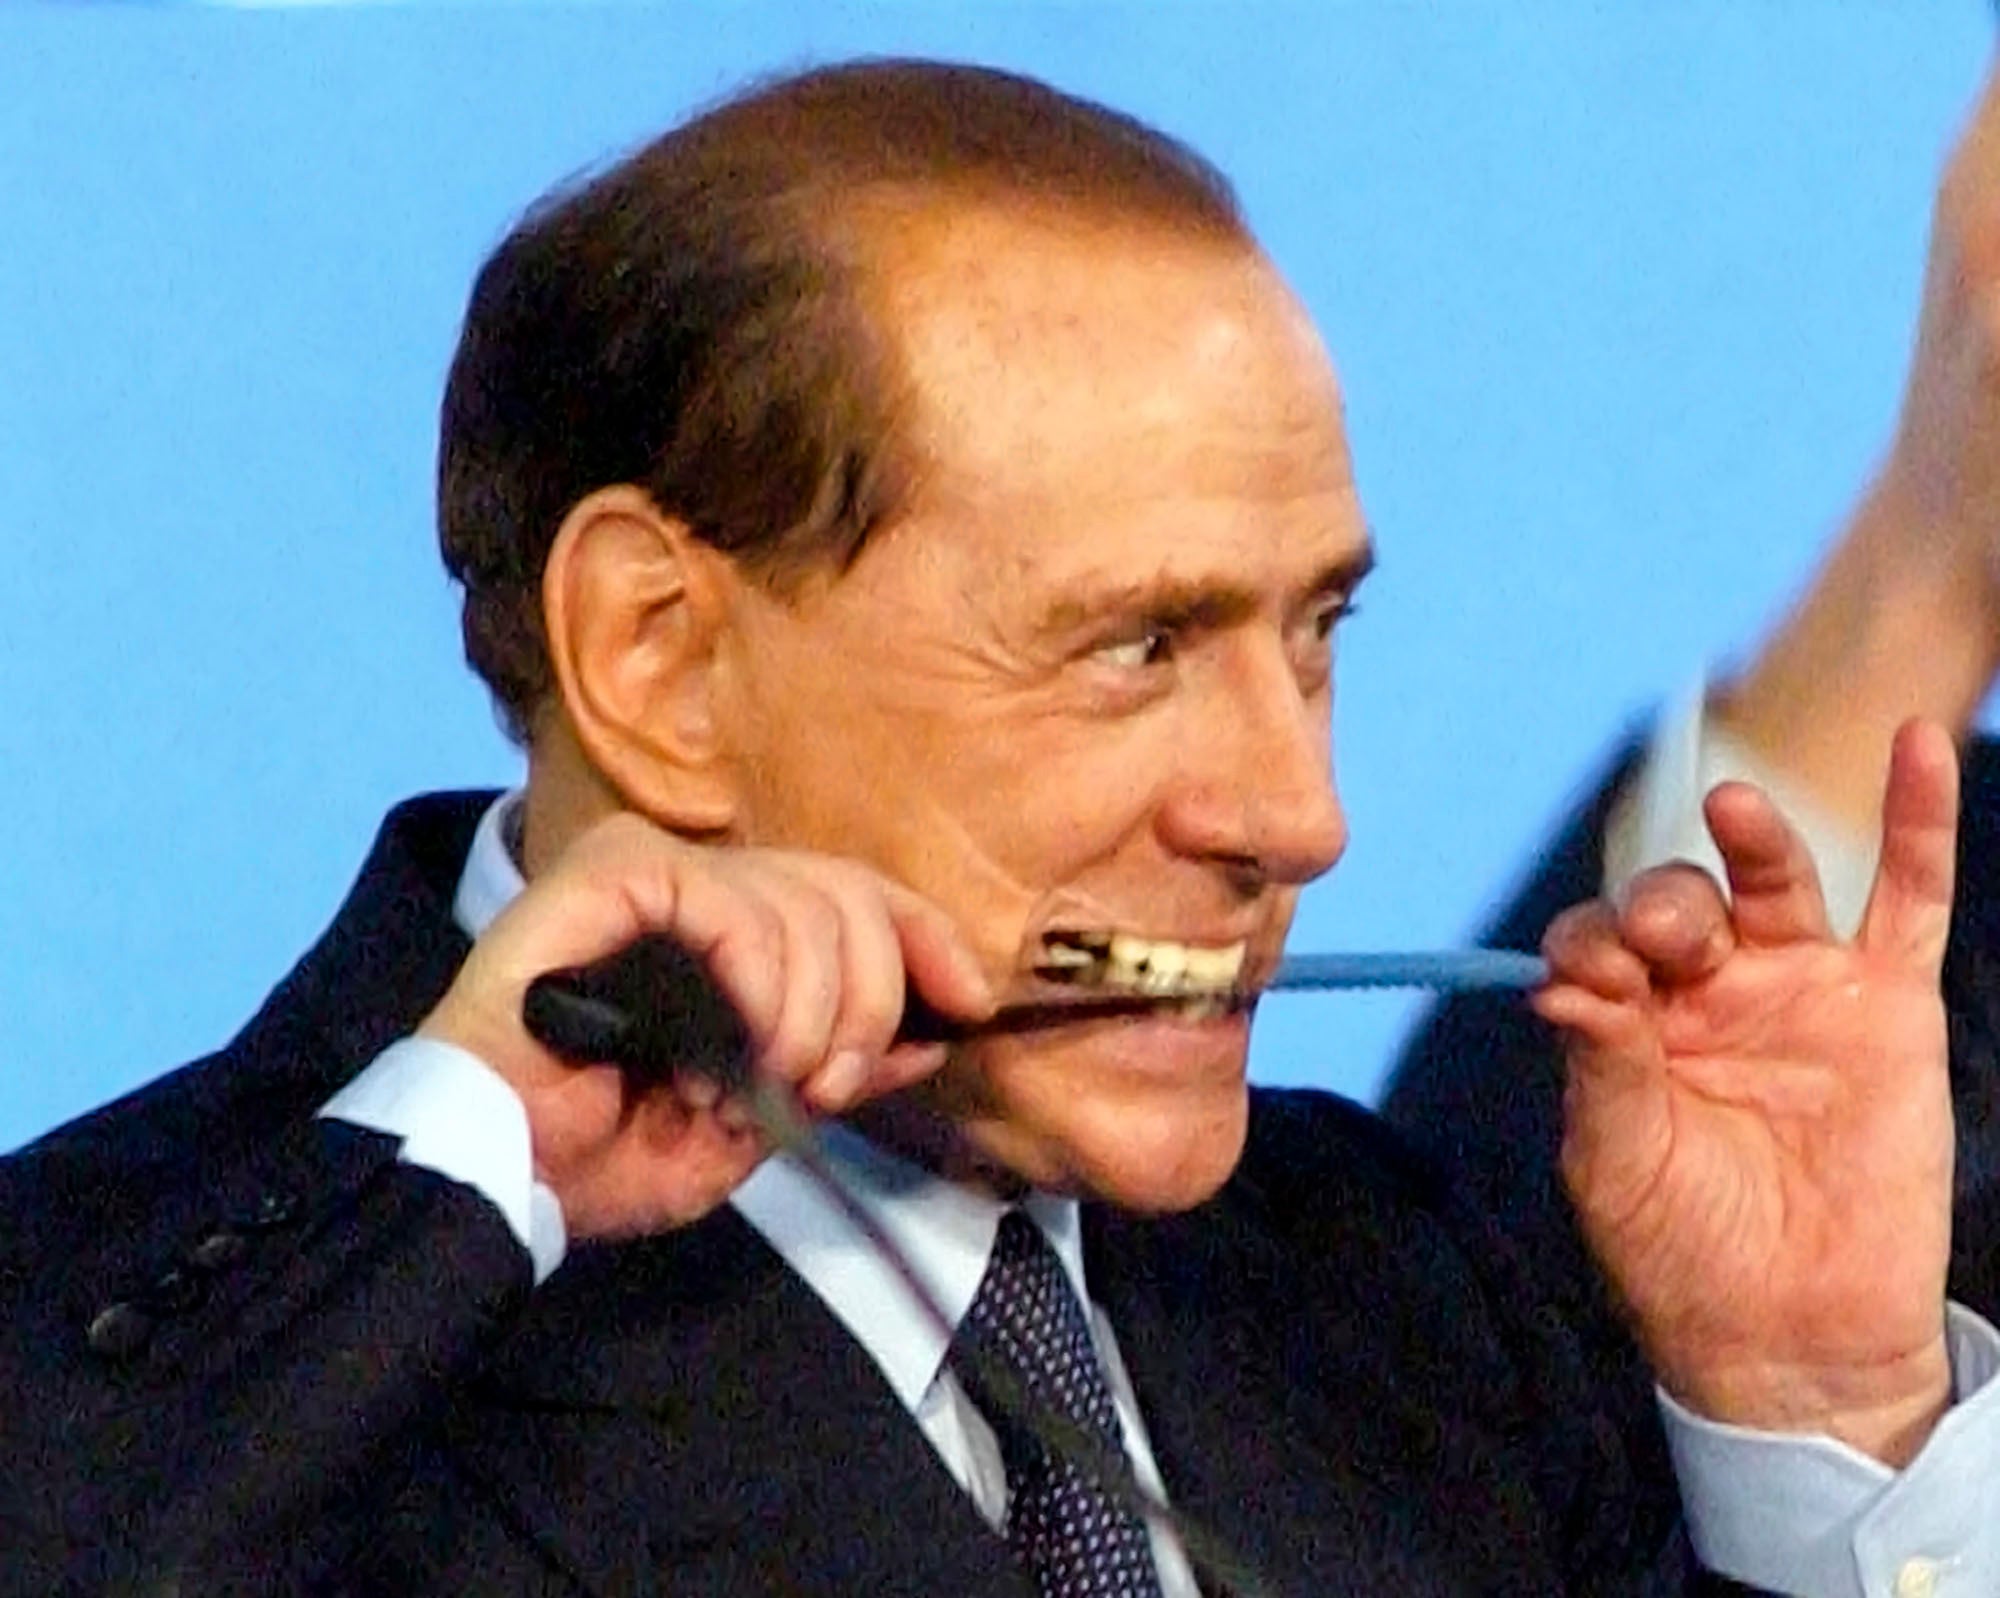 Centre-right Berlusconi has hitched himself to a government that legitimises the far right